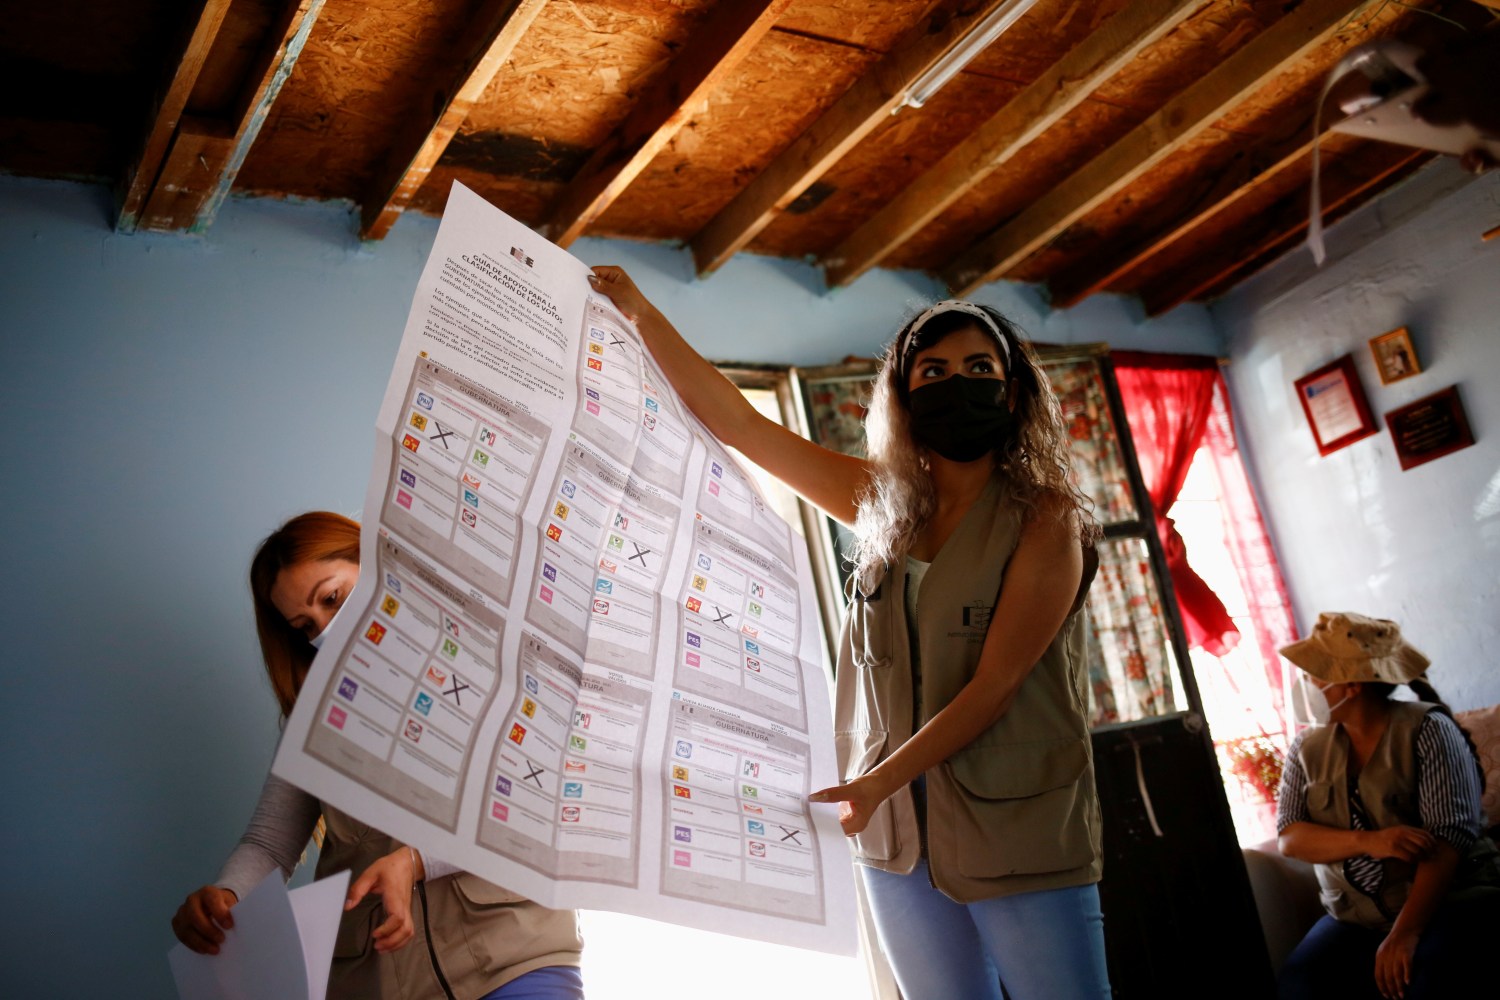 An electoral worker shows voting material to a woman who was selected by the National Electoral Institute (INE) to act as a president of a polling station, ahead of the mid-term elections on June 6, at the Anapra neighborhood, in Ciudad Juarez, Mexico June 1, 2021. REUTERS/Jose Luis Gonzalez